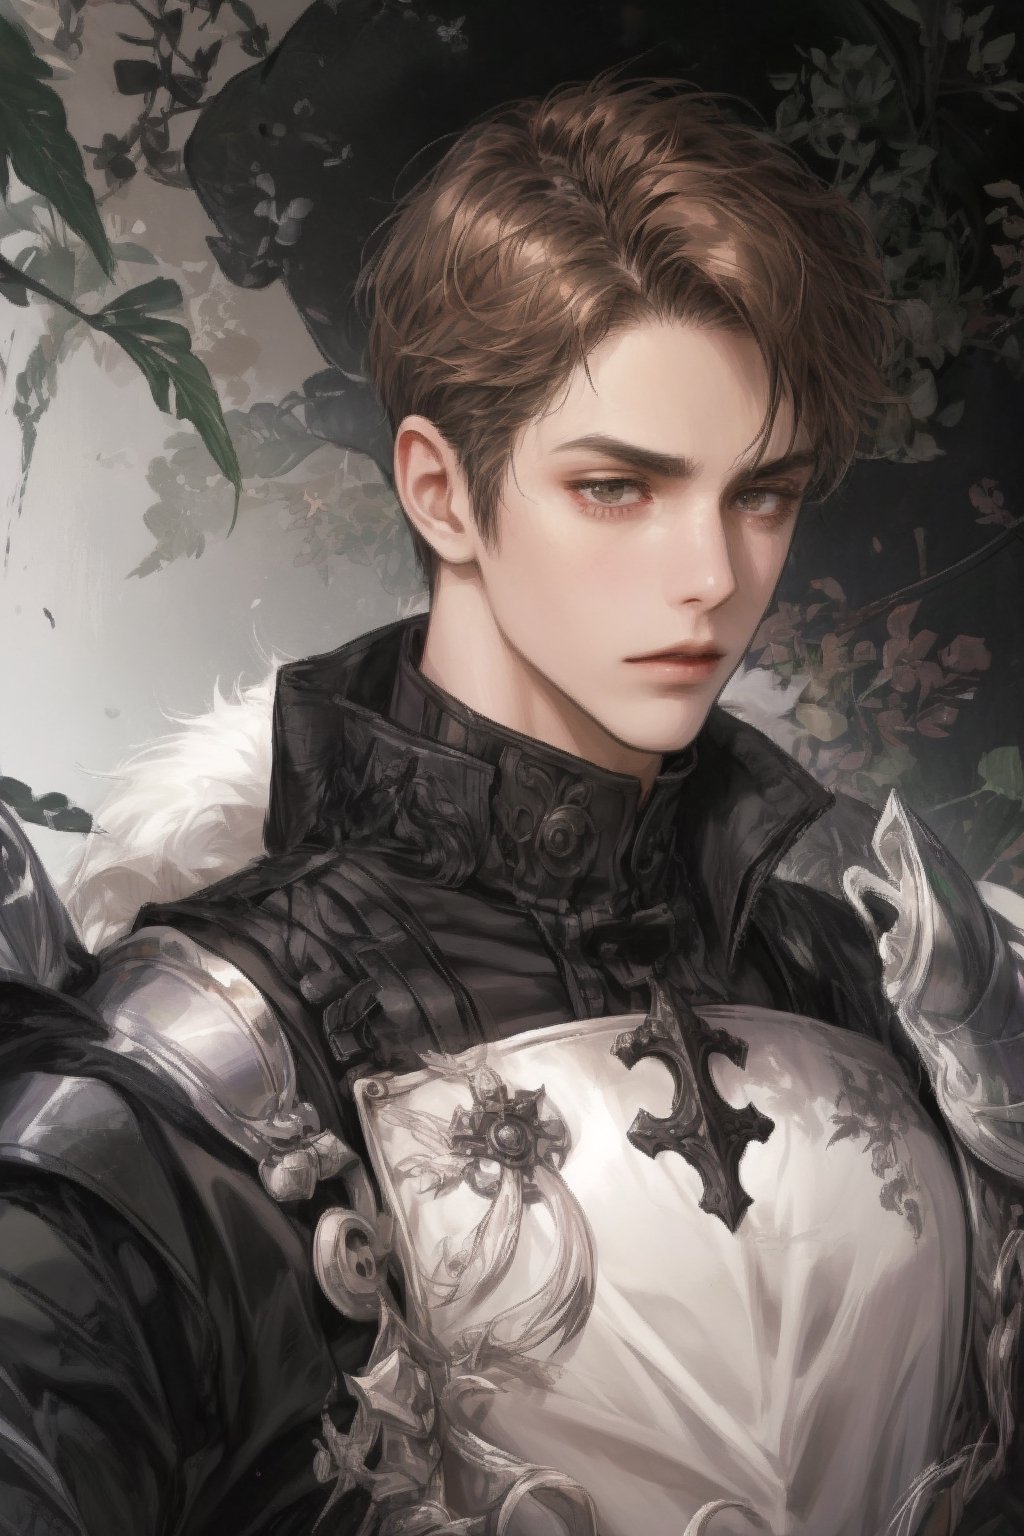 muscular, anime character with short parted hair, dark brown hair, gray eyes, medium background, knight armor, knight, warrior, a character portrait, rococo.
{{parted bangs}}, male_focus, medium_background, 1guy, 1boy, sole_male, {{{{solo}}}}, serious expression, elegant, dark_ brown_hair, closed lips